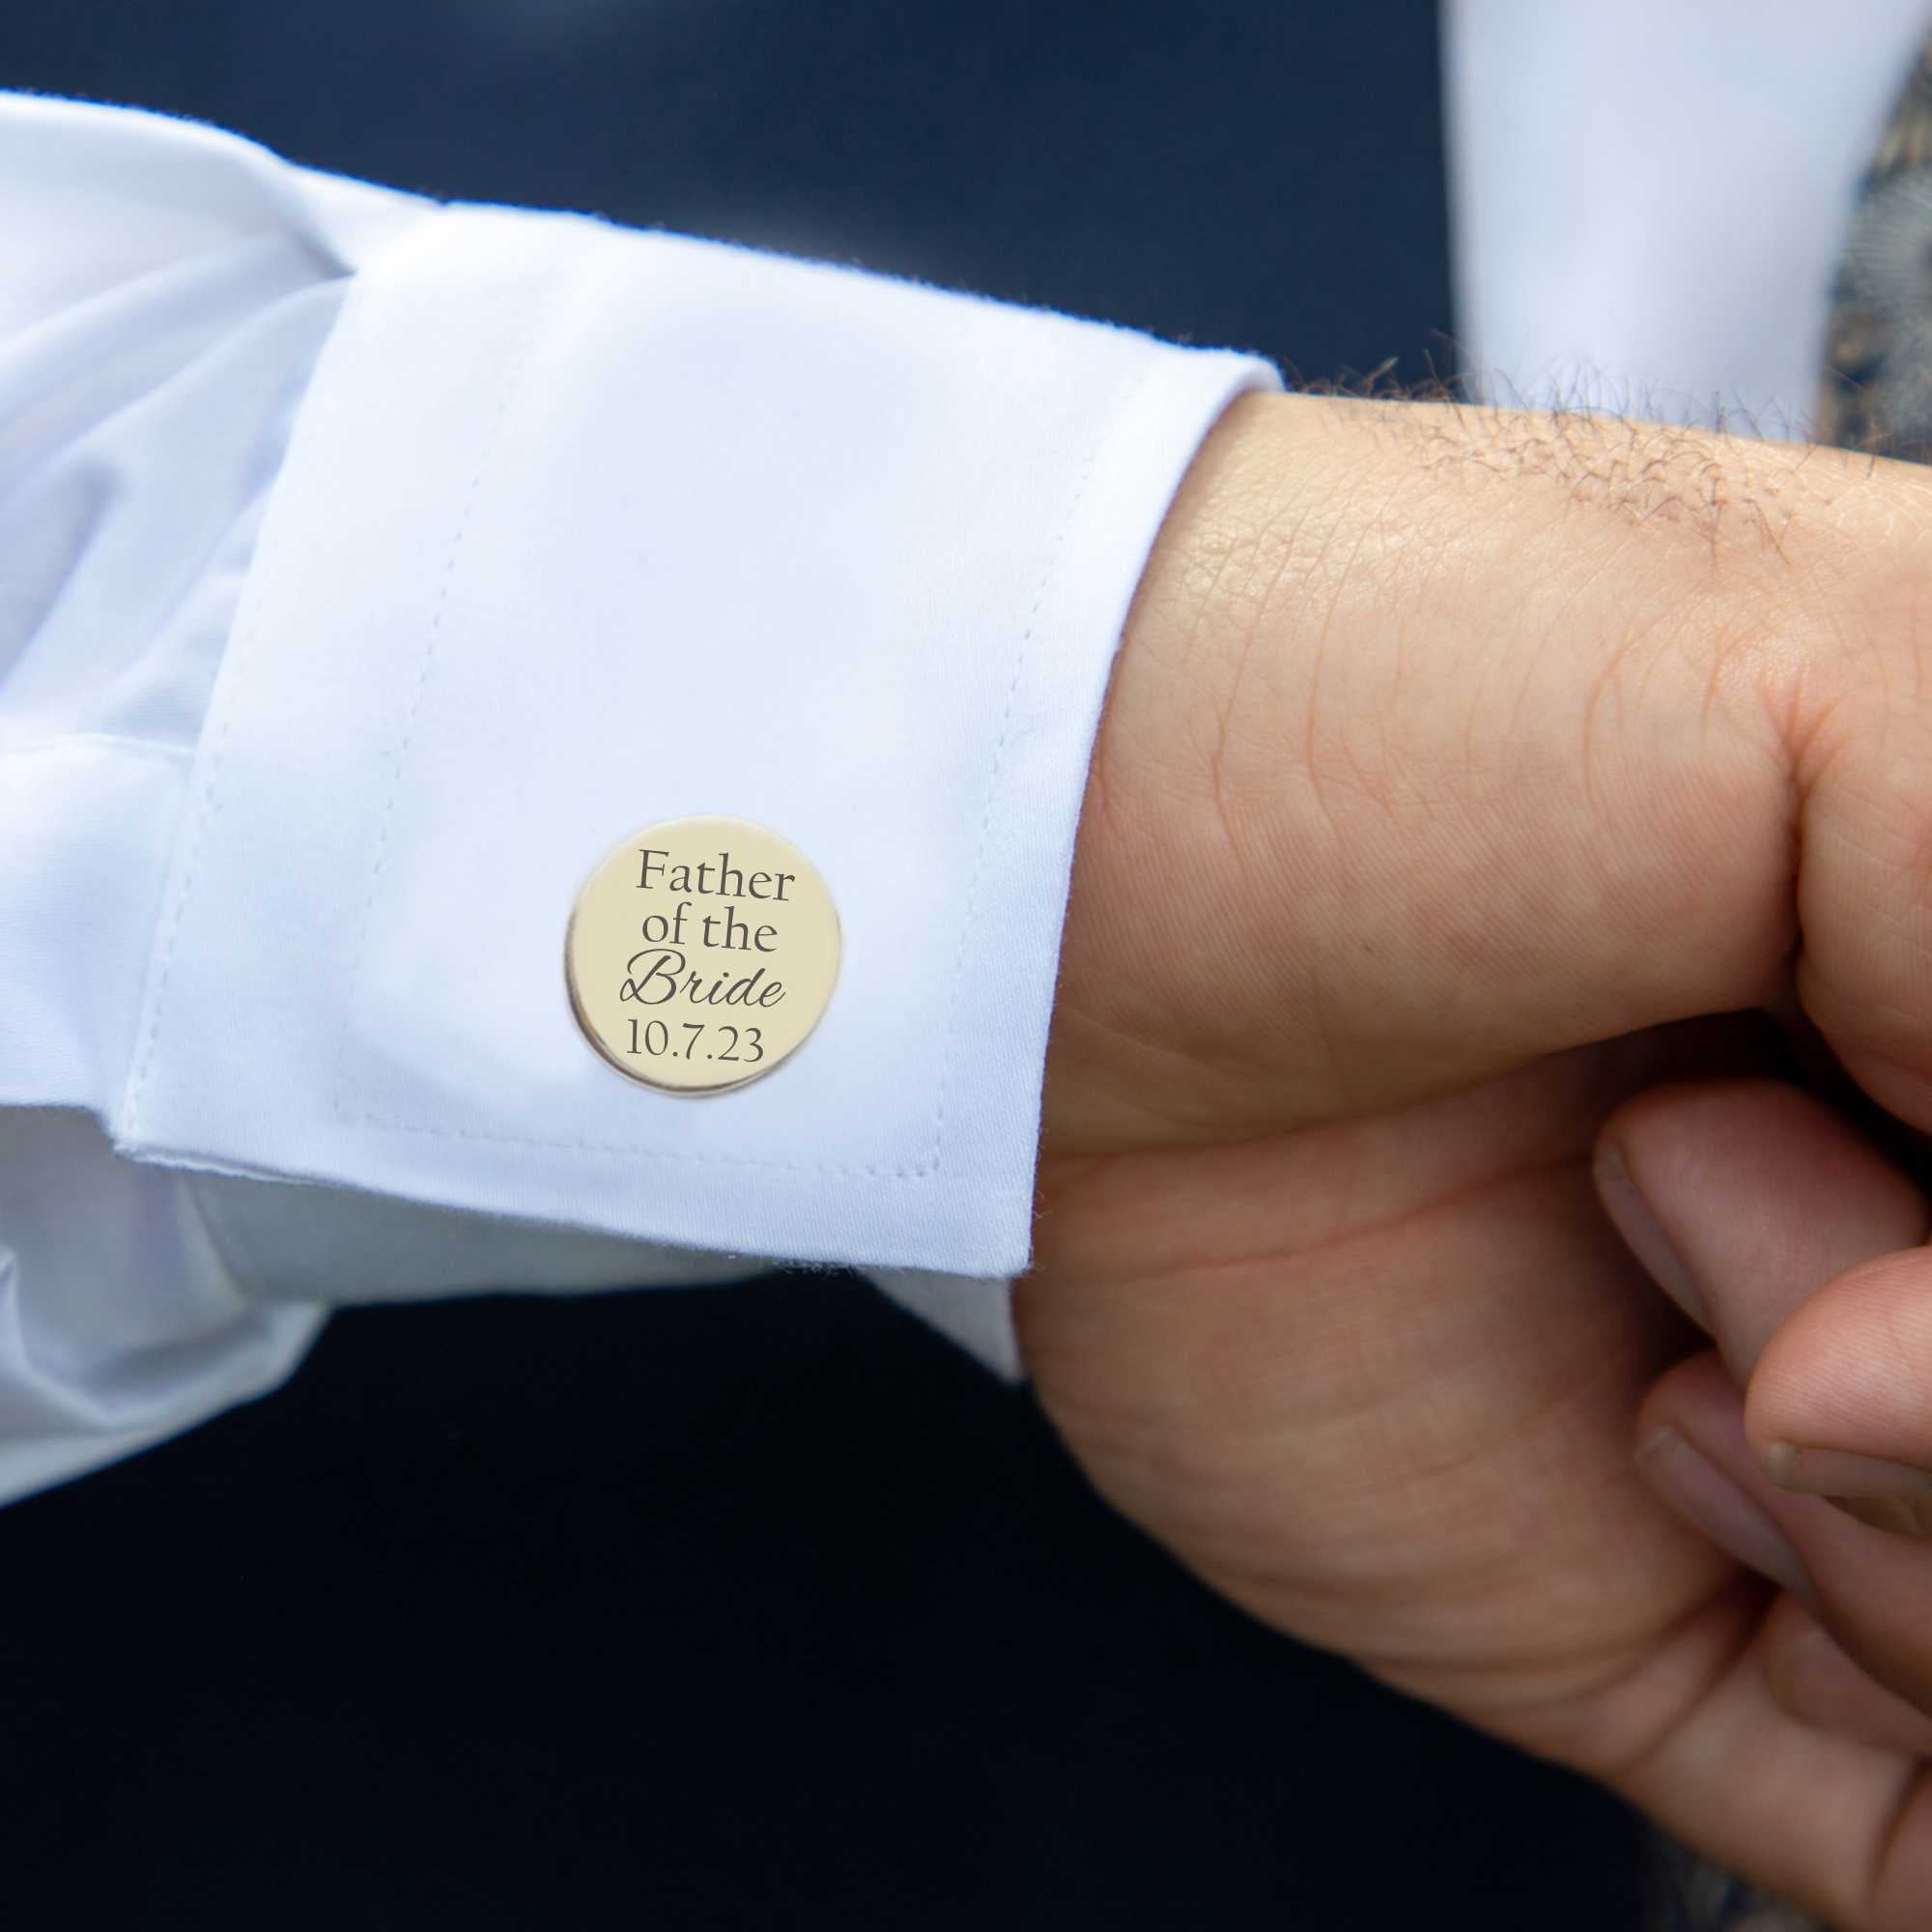 Always Your Little Girl - Father of the Bride Cufflinks